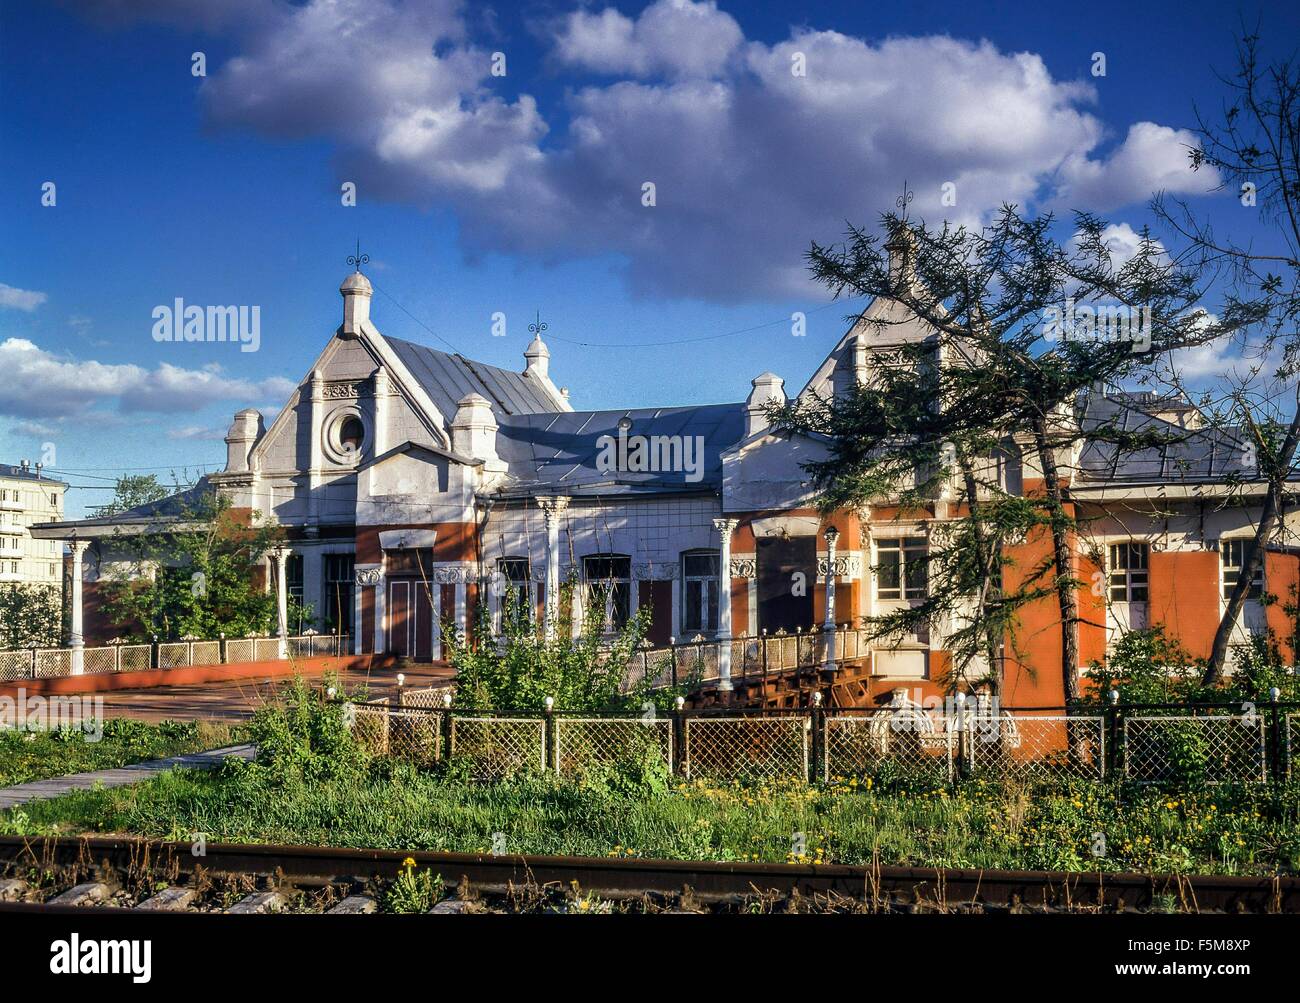 Russia, Moscow. Moscow Ring Railway. Vorobievy Gory railway station. Stock Photo